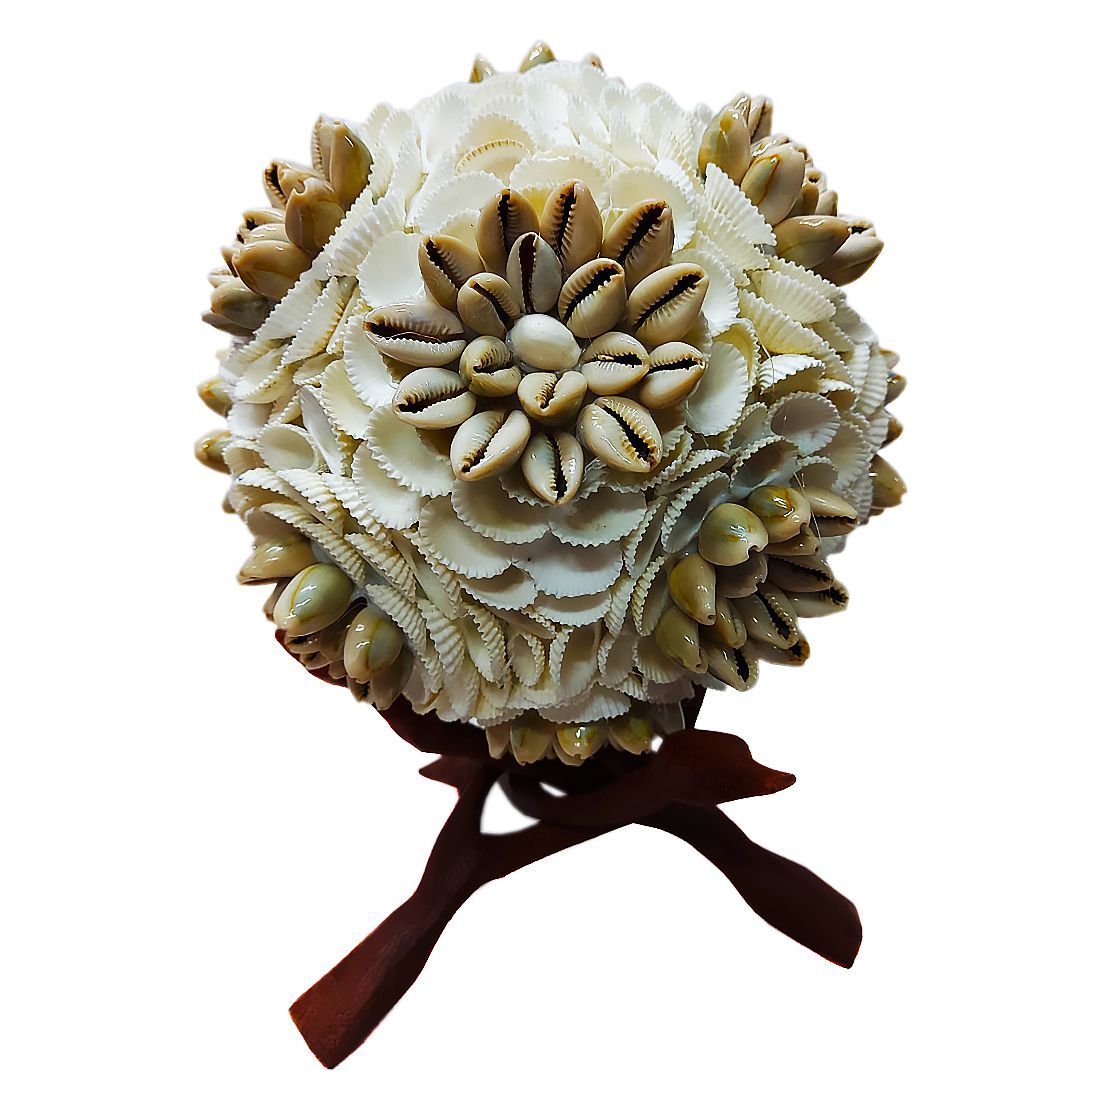 Hubshi Sea Shell Gray cowrie Flower Ball With 3 Legs Wooden Cobra Stand Handmade